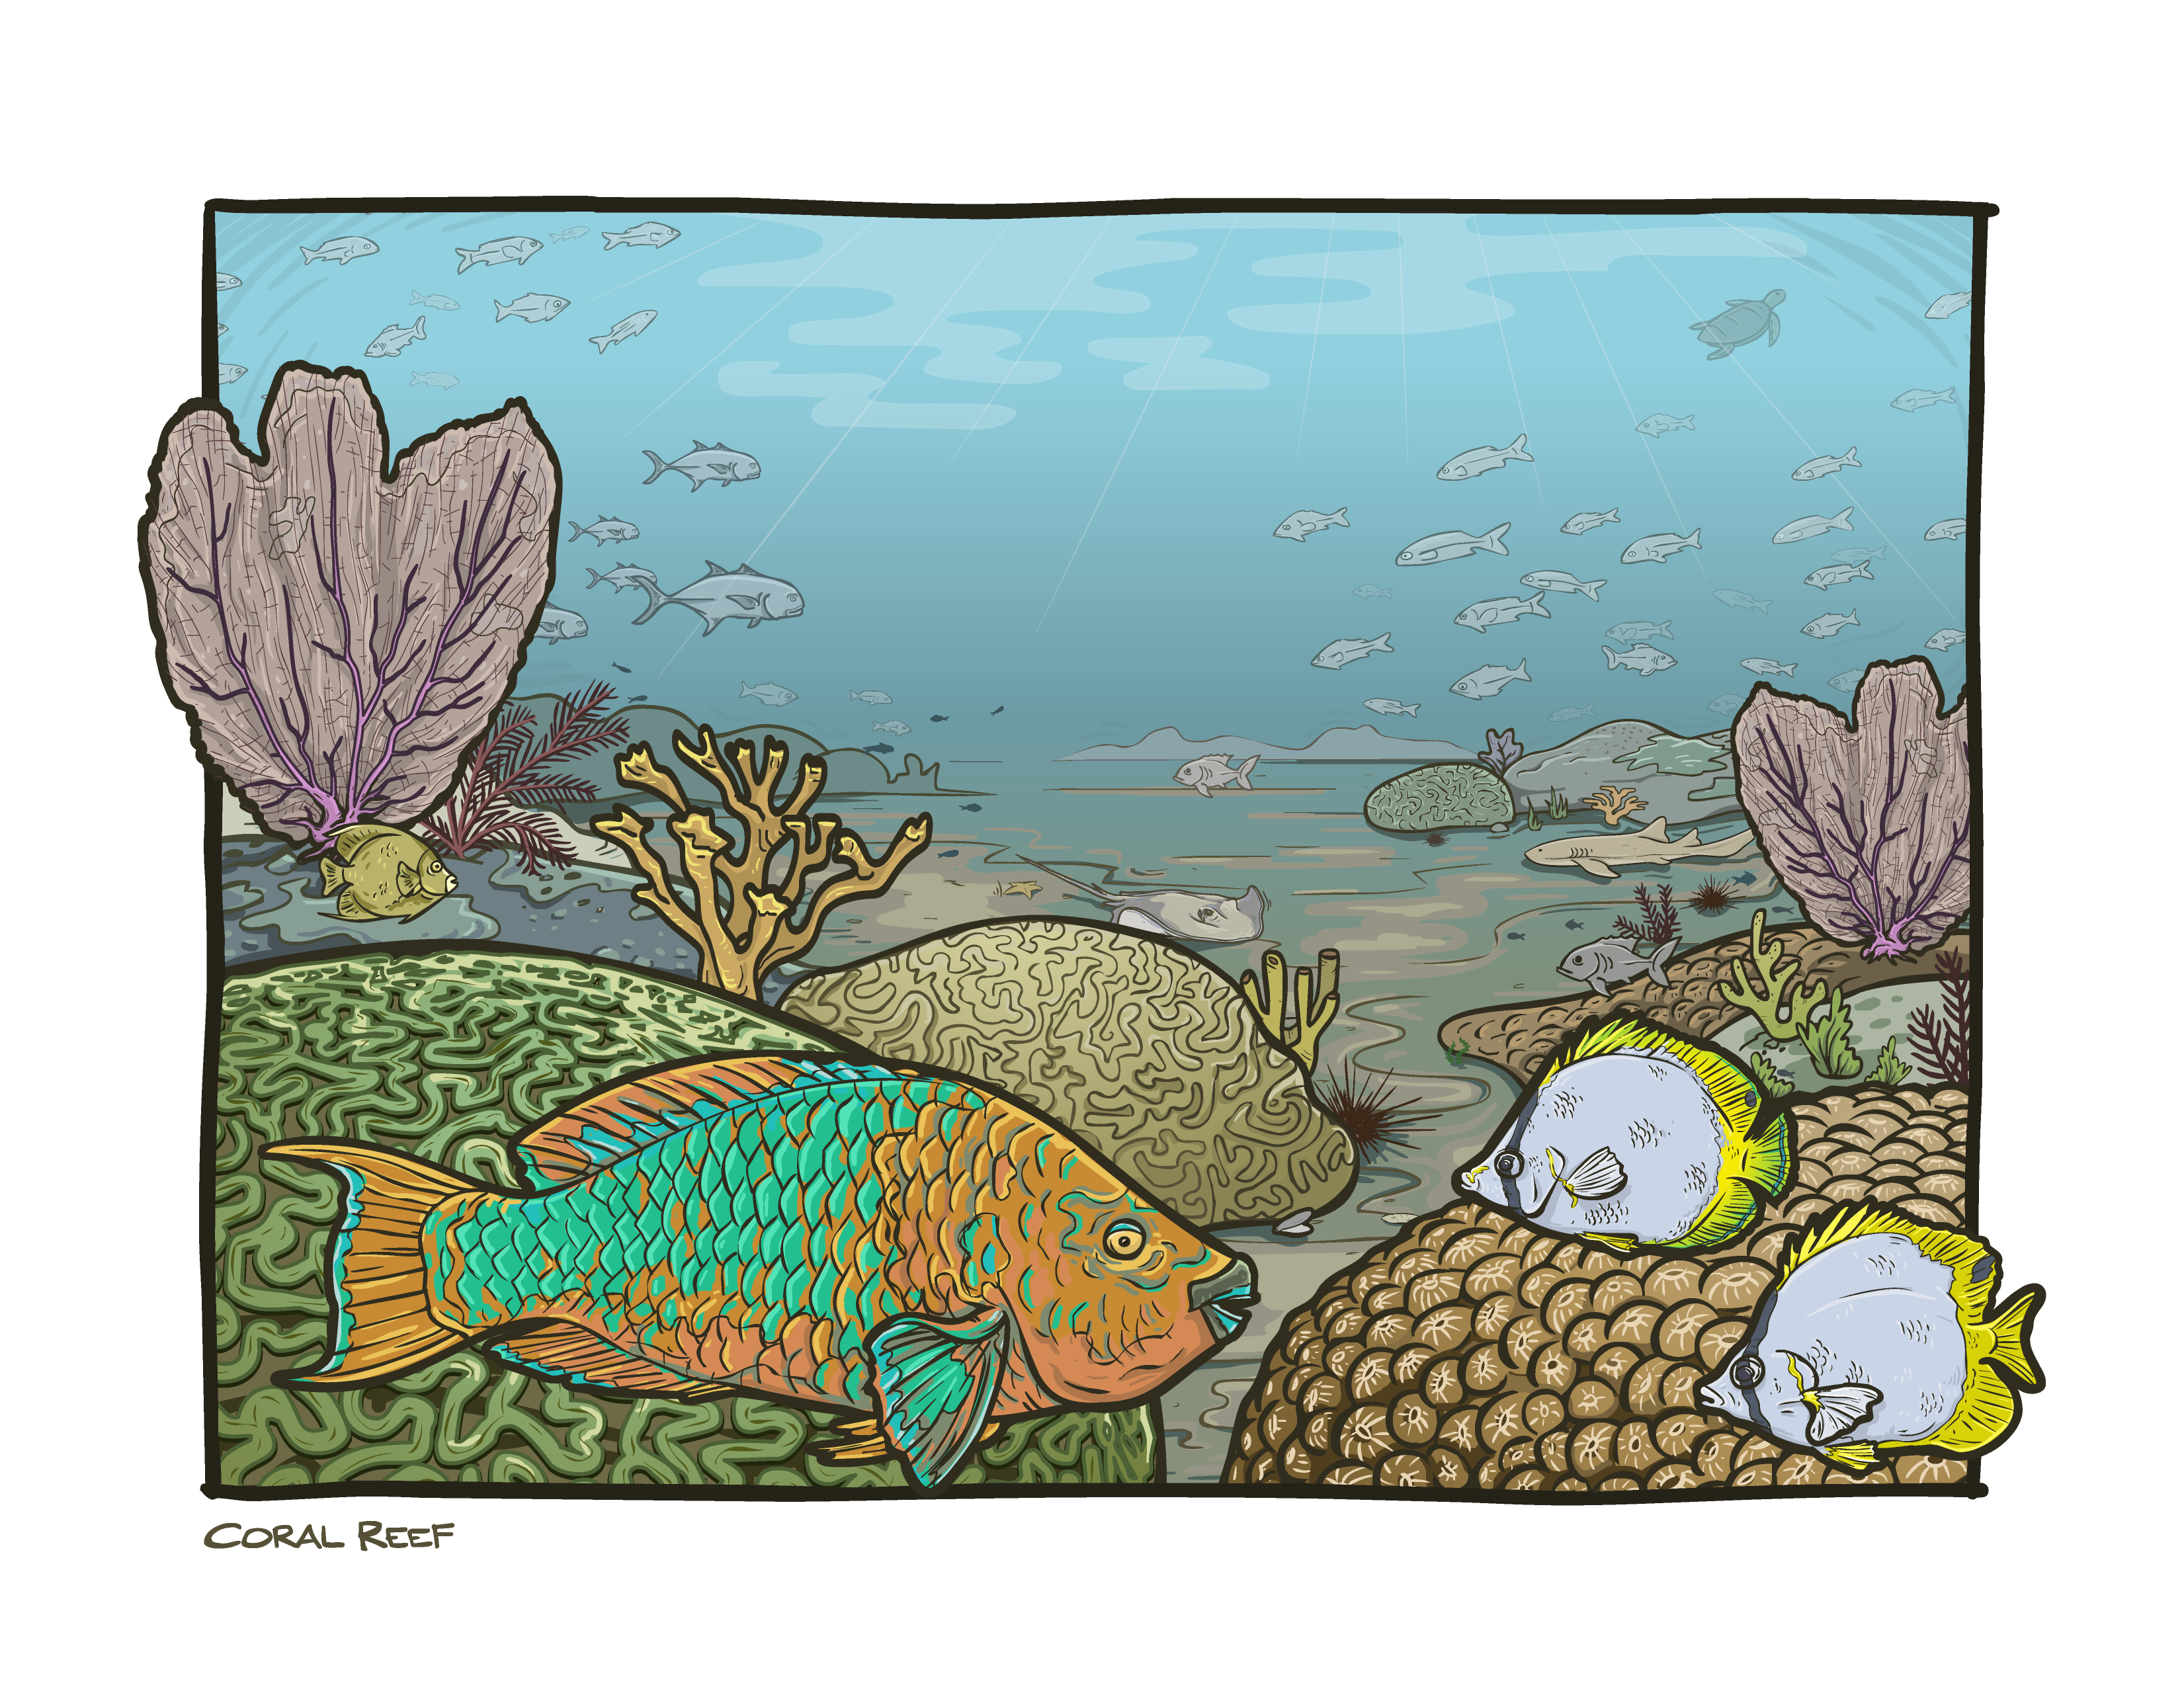 Coral reef composite image